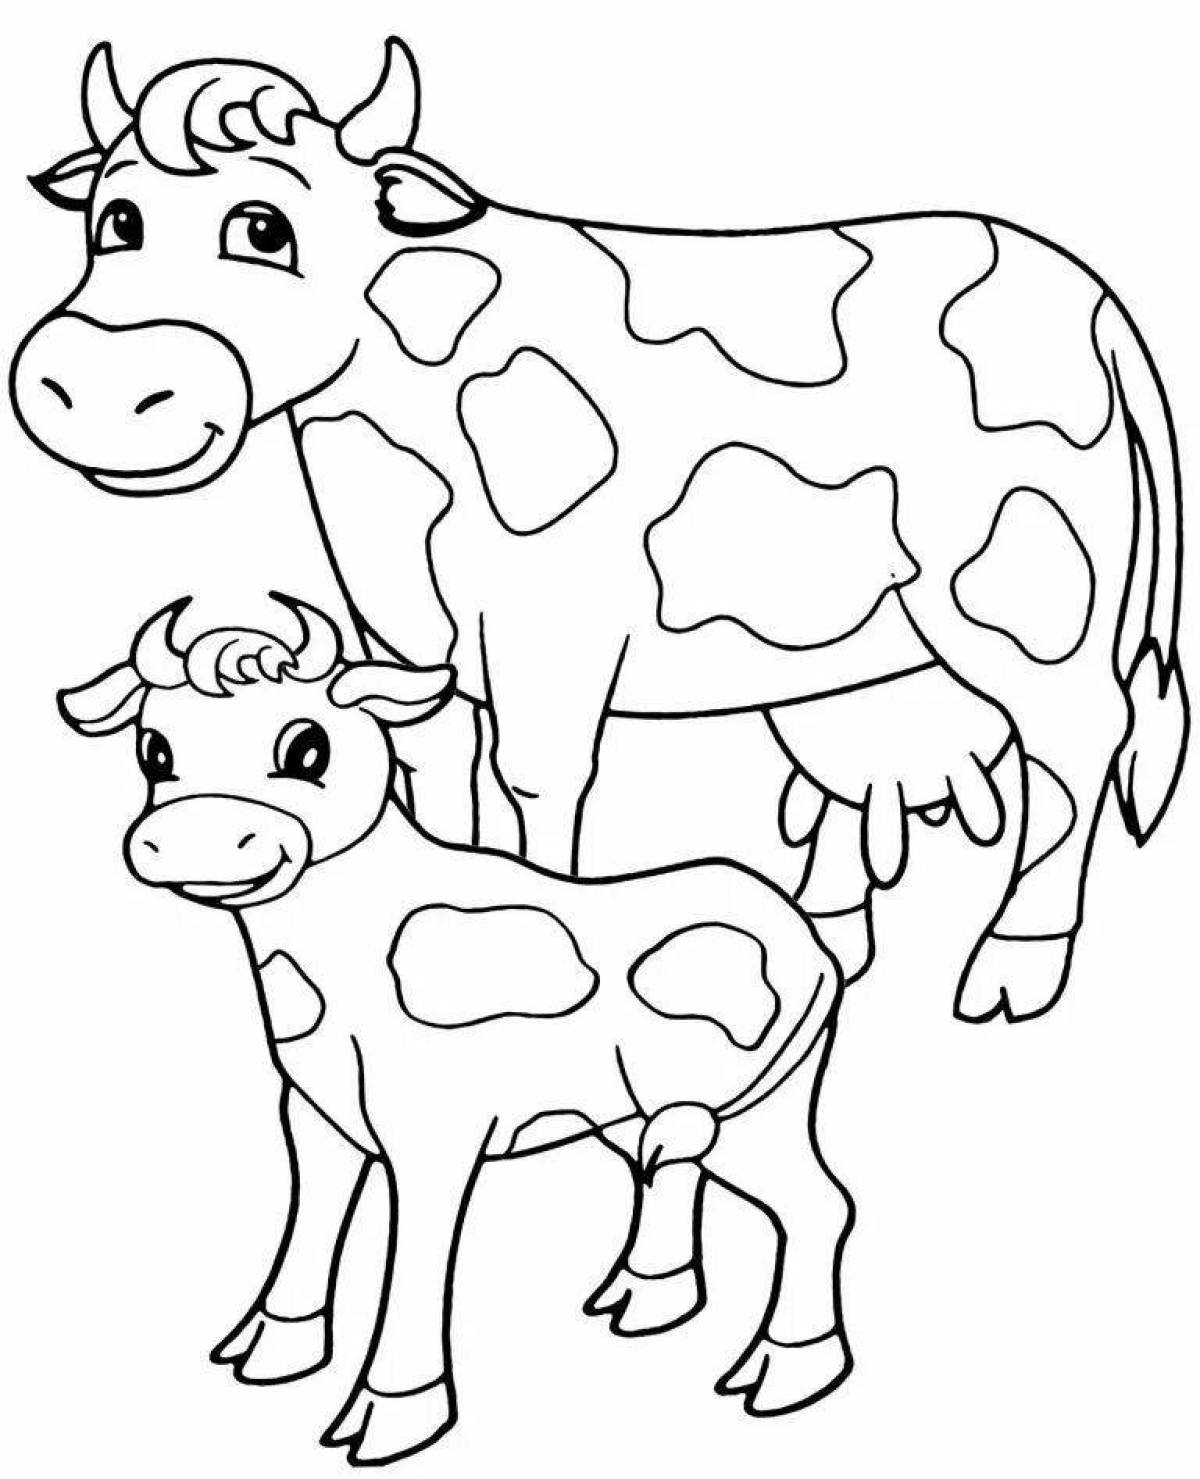 Colouring friendly cow